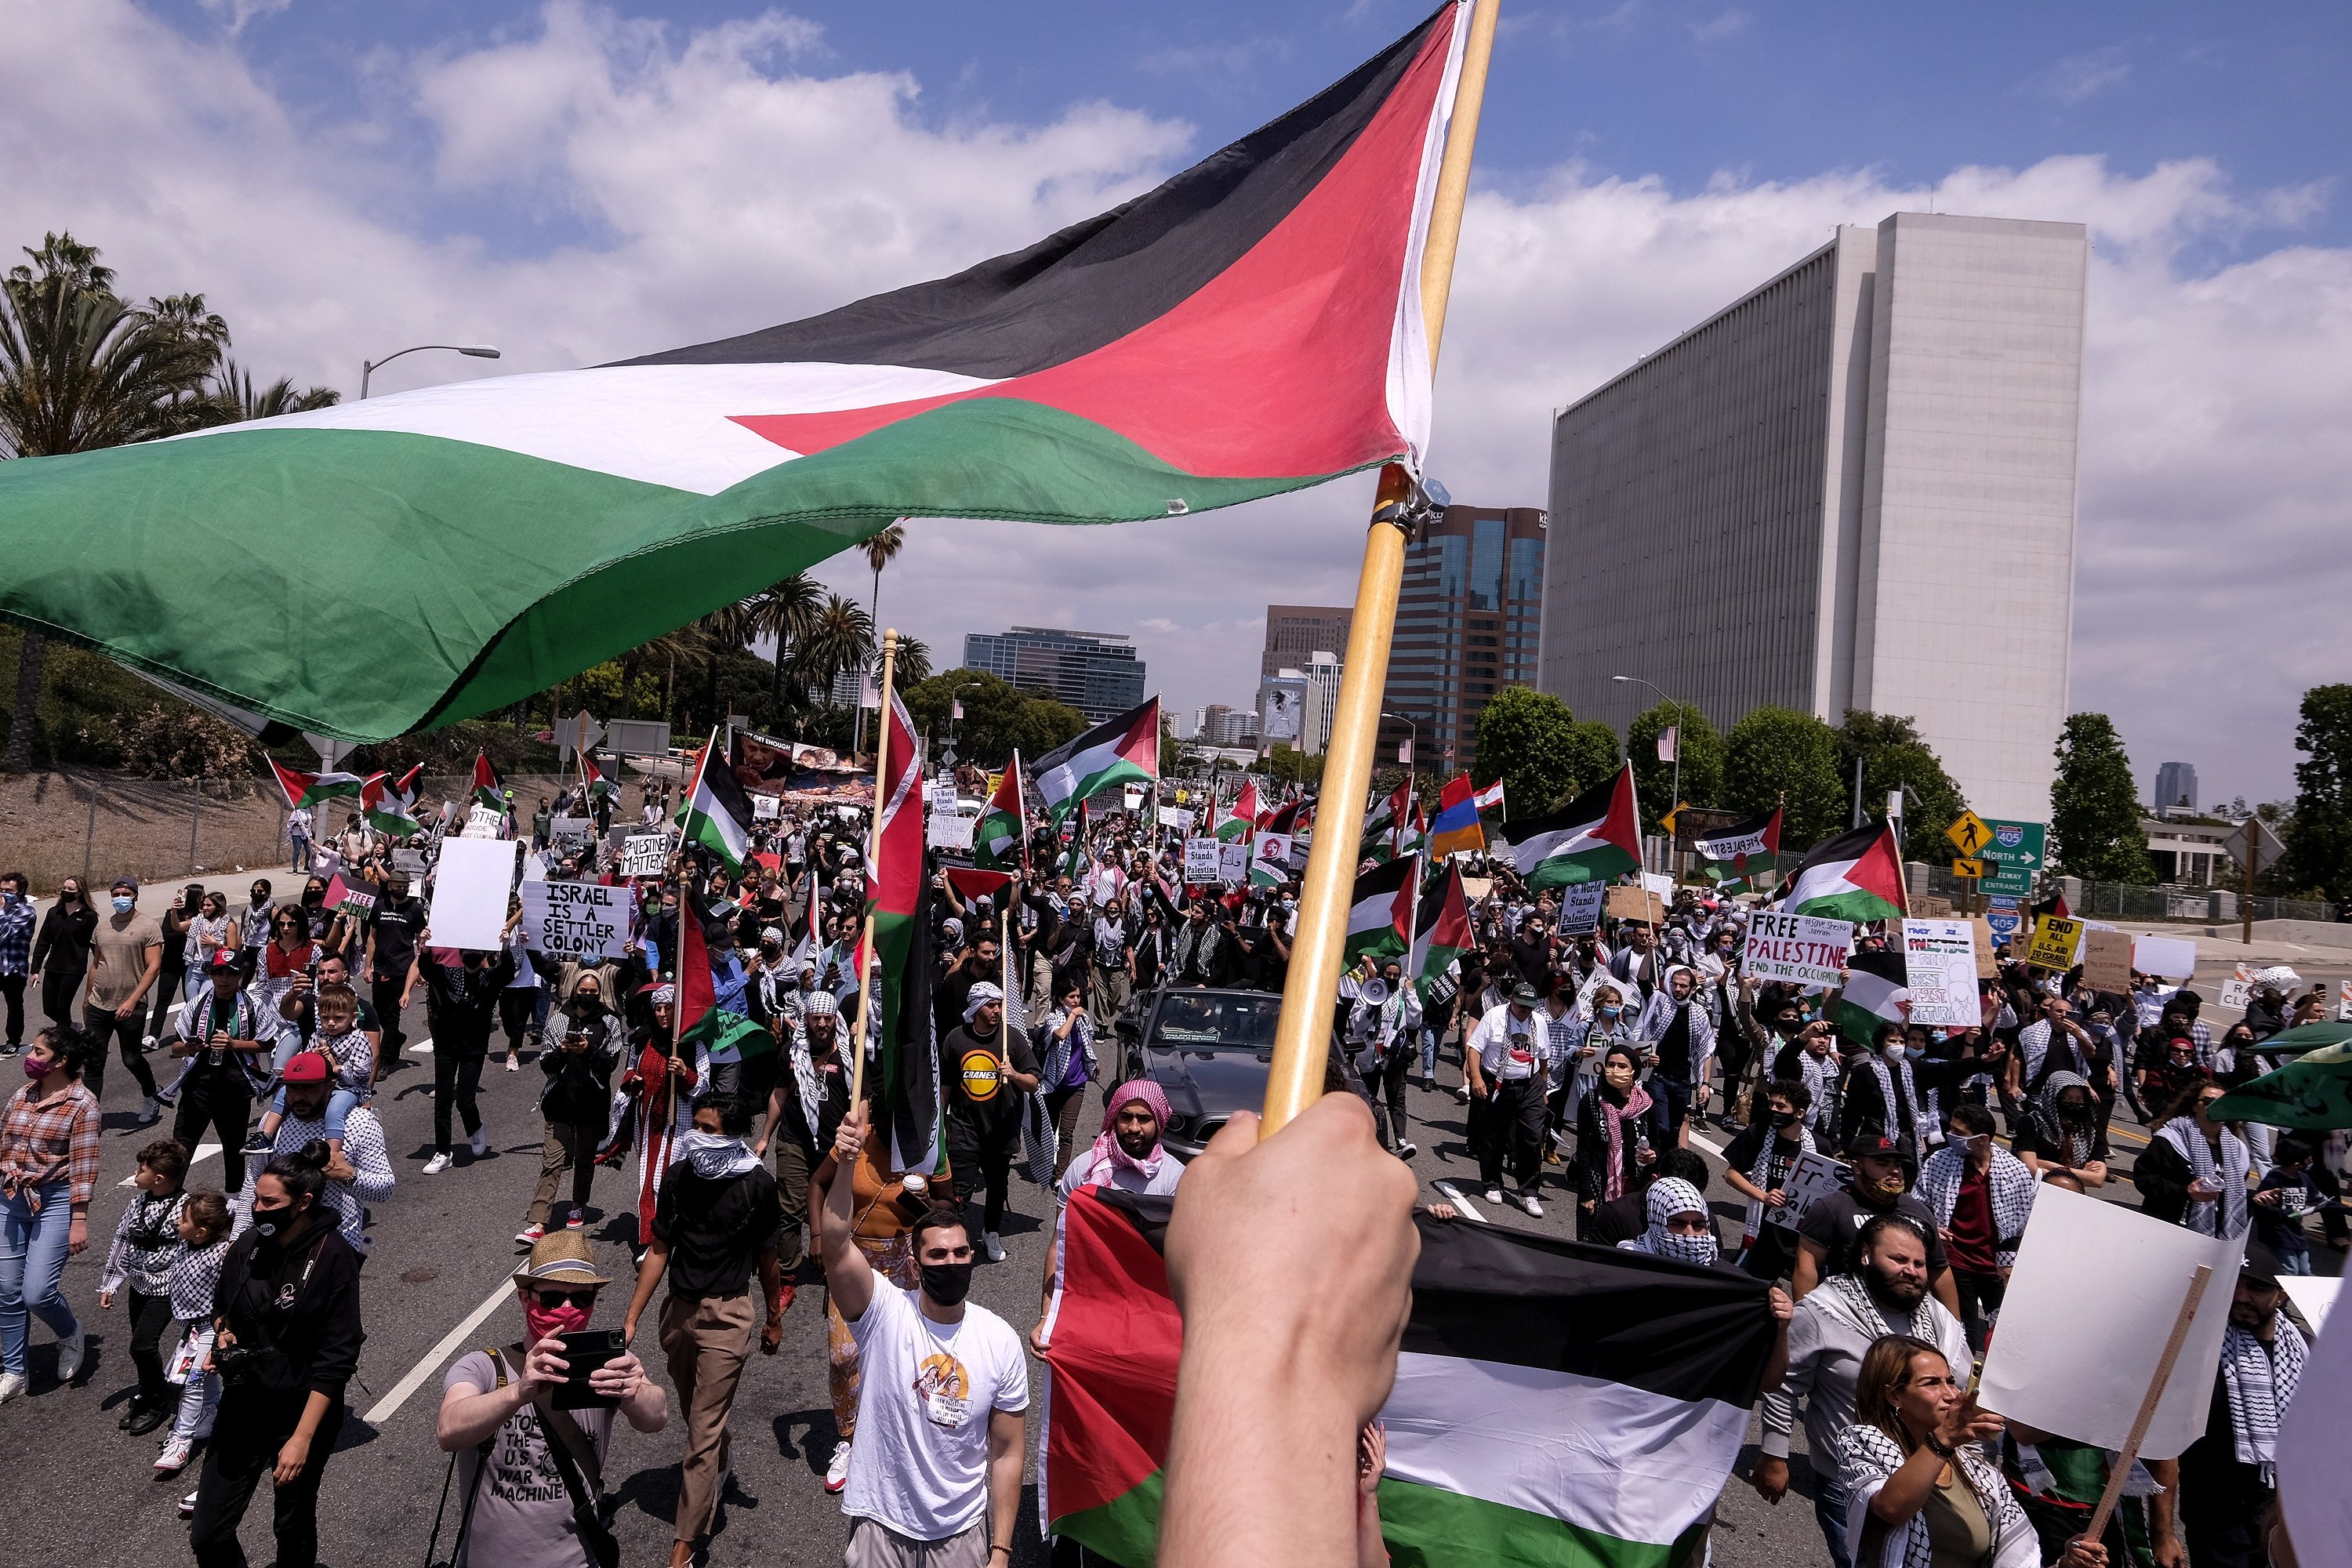 Demonstrators holding signs march to Israeli Consulate during a protest against Israel and in support of Palestinians, in Los Angeles, U.S., May 15, 2021. (AP Photo)